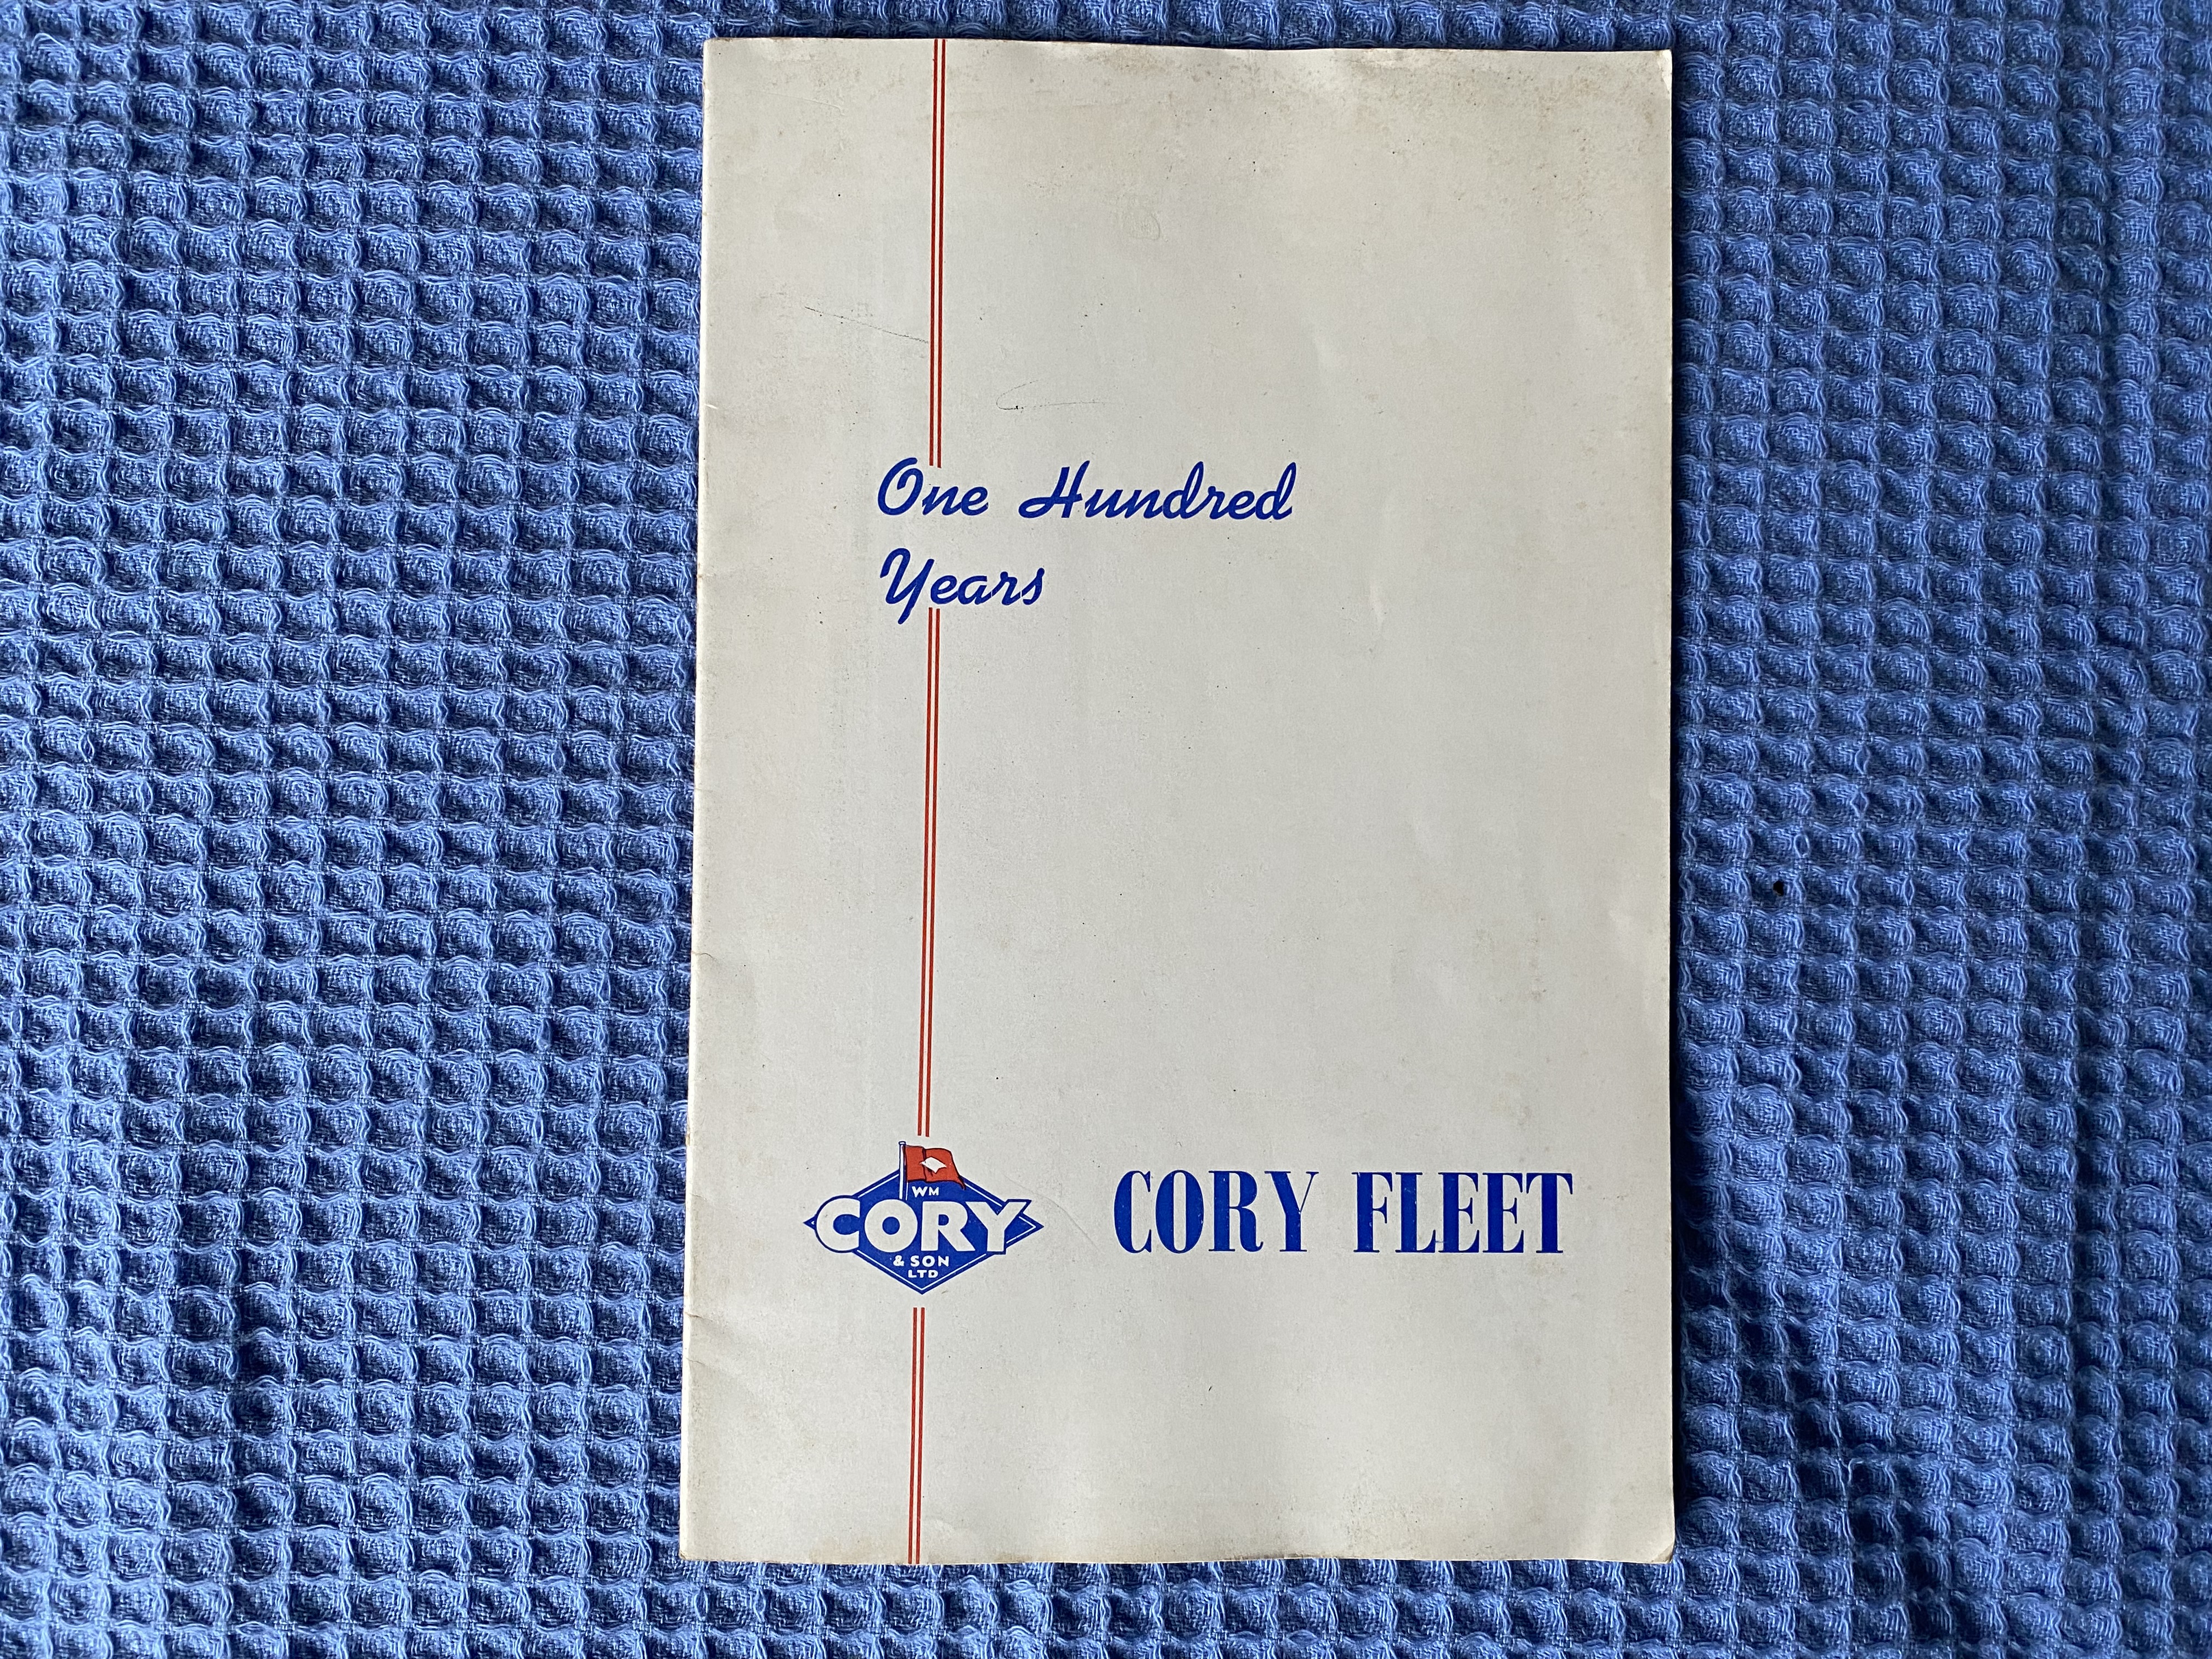 BOOKLET FROM THE CORY FLEET COVERING ONE HUNDRED YEARS